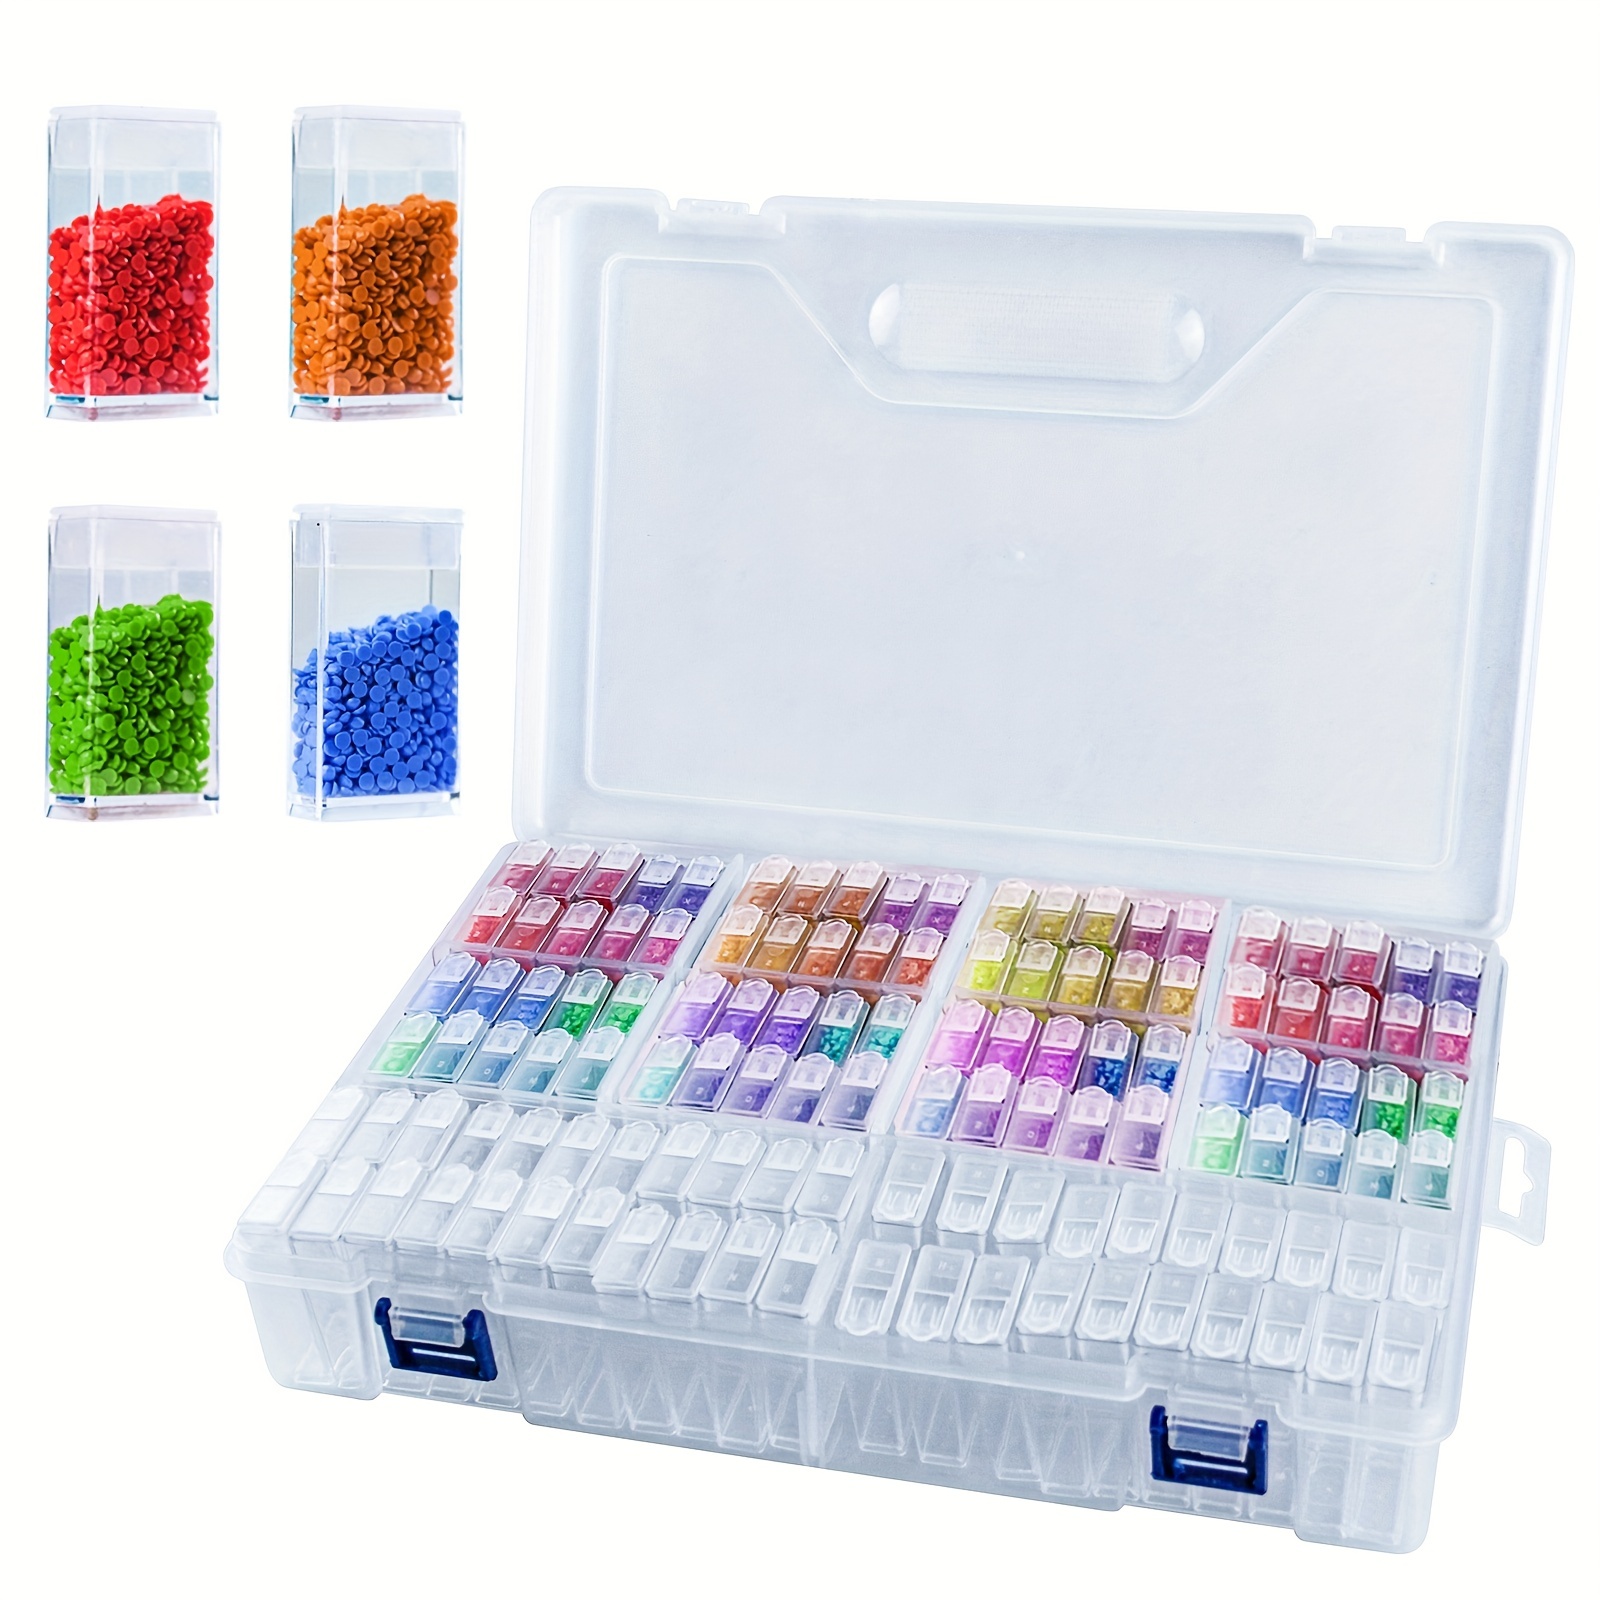  EXCEART 1 Set Point Rhinestone Pen Arts and Crafts Organizer  Diamond Drawing Accessories and Tools Diamond Drawing Tools and Accessories  Multifunction Container Pp : Arts, Crafts & Sewing